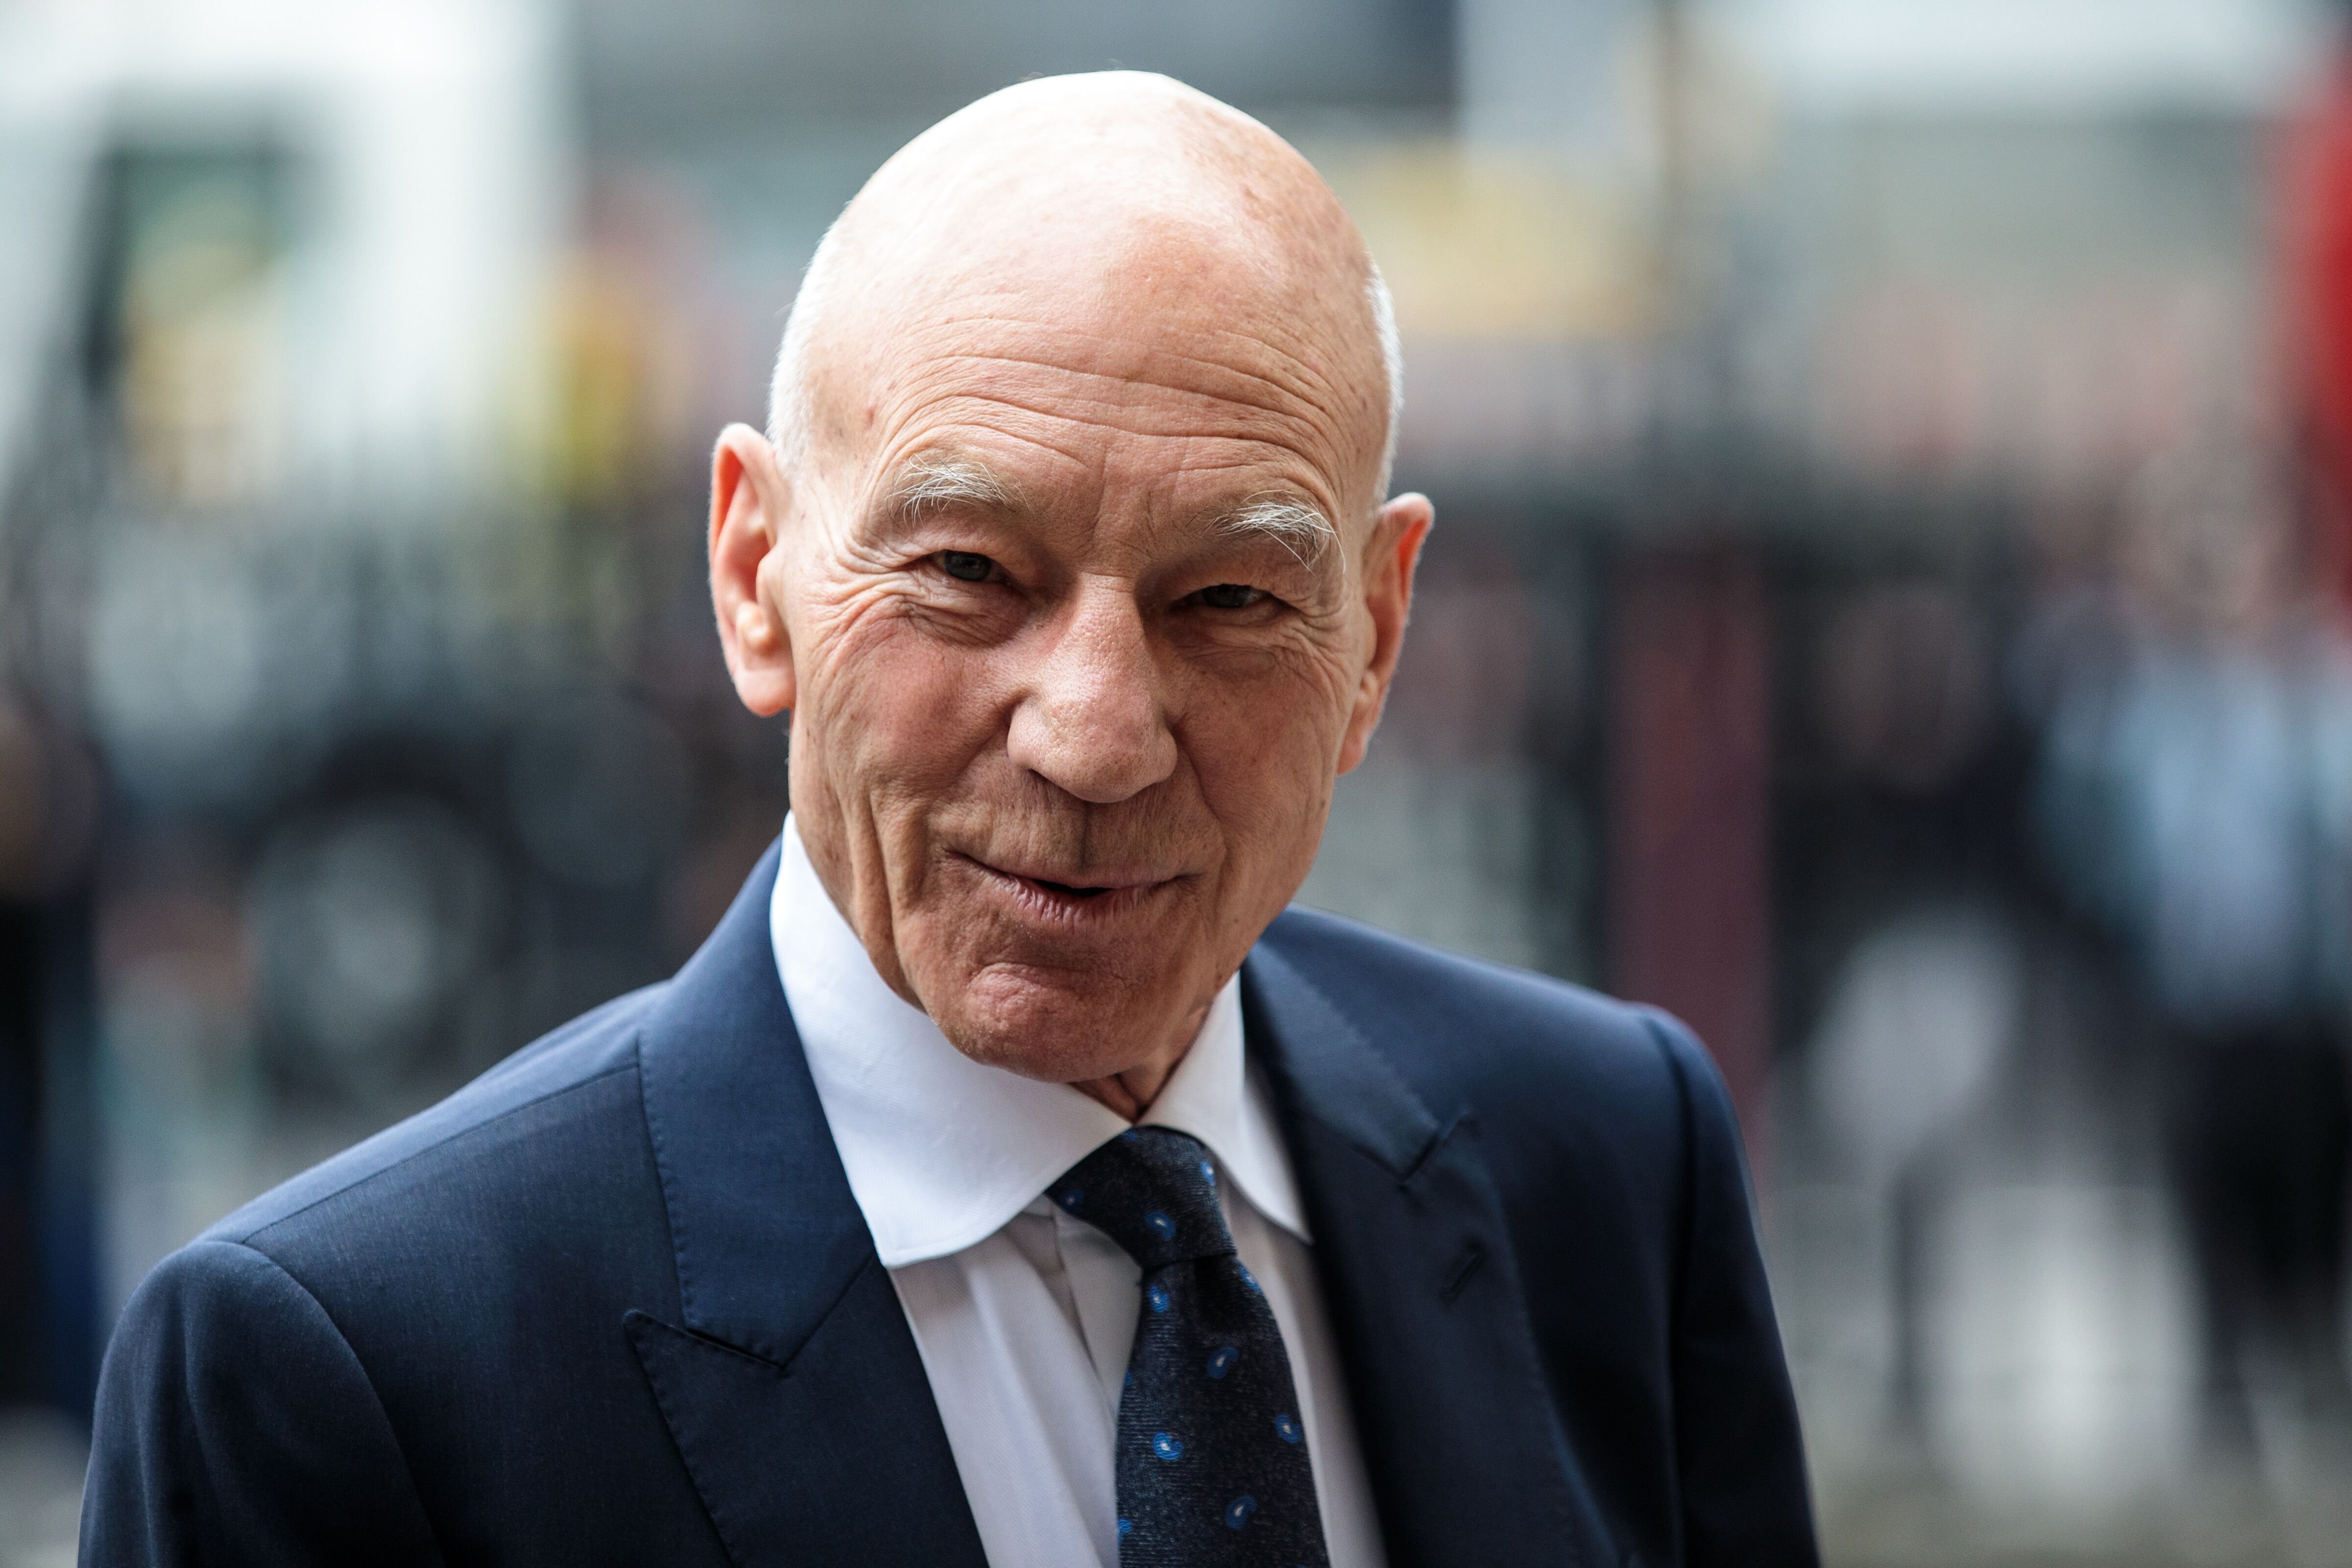 Patrick Stewart at Westminster Abbey for a memorial service for Sir Peter Hall OBE on September 11, 2018, in London, England | Photo: Jack Taylor/Getty Images